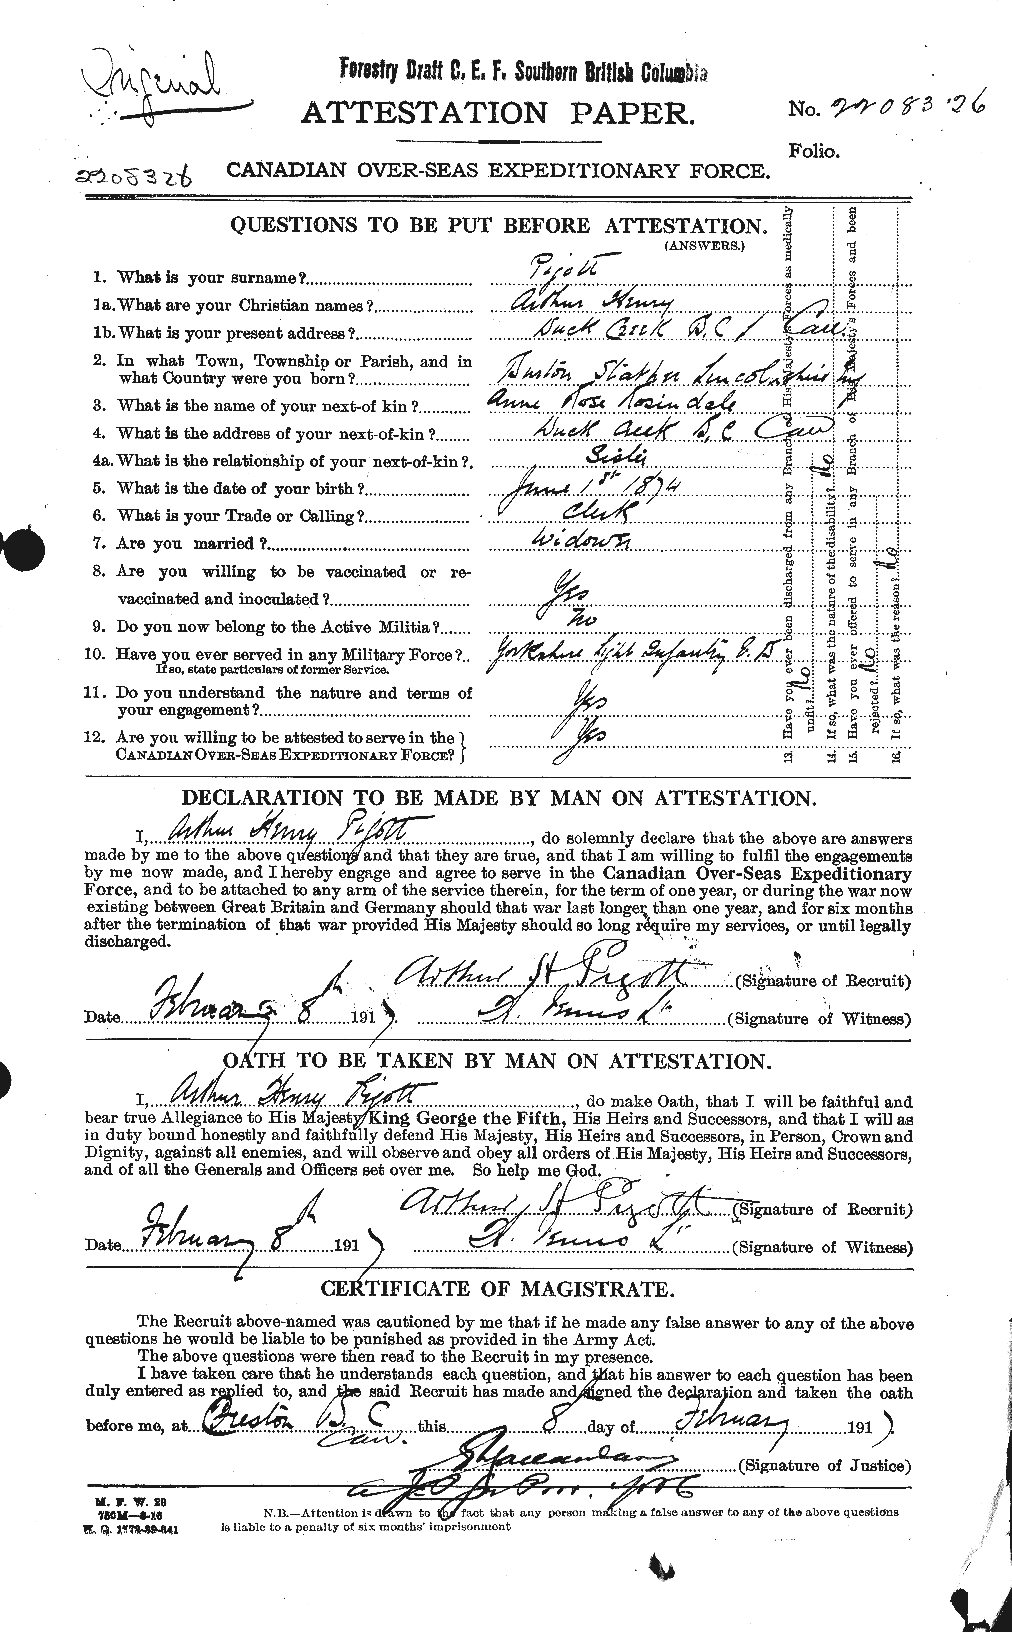 Personnel Records of the First World War - CEF 582119a